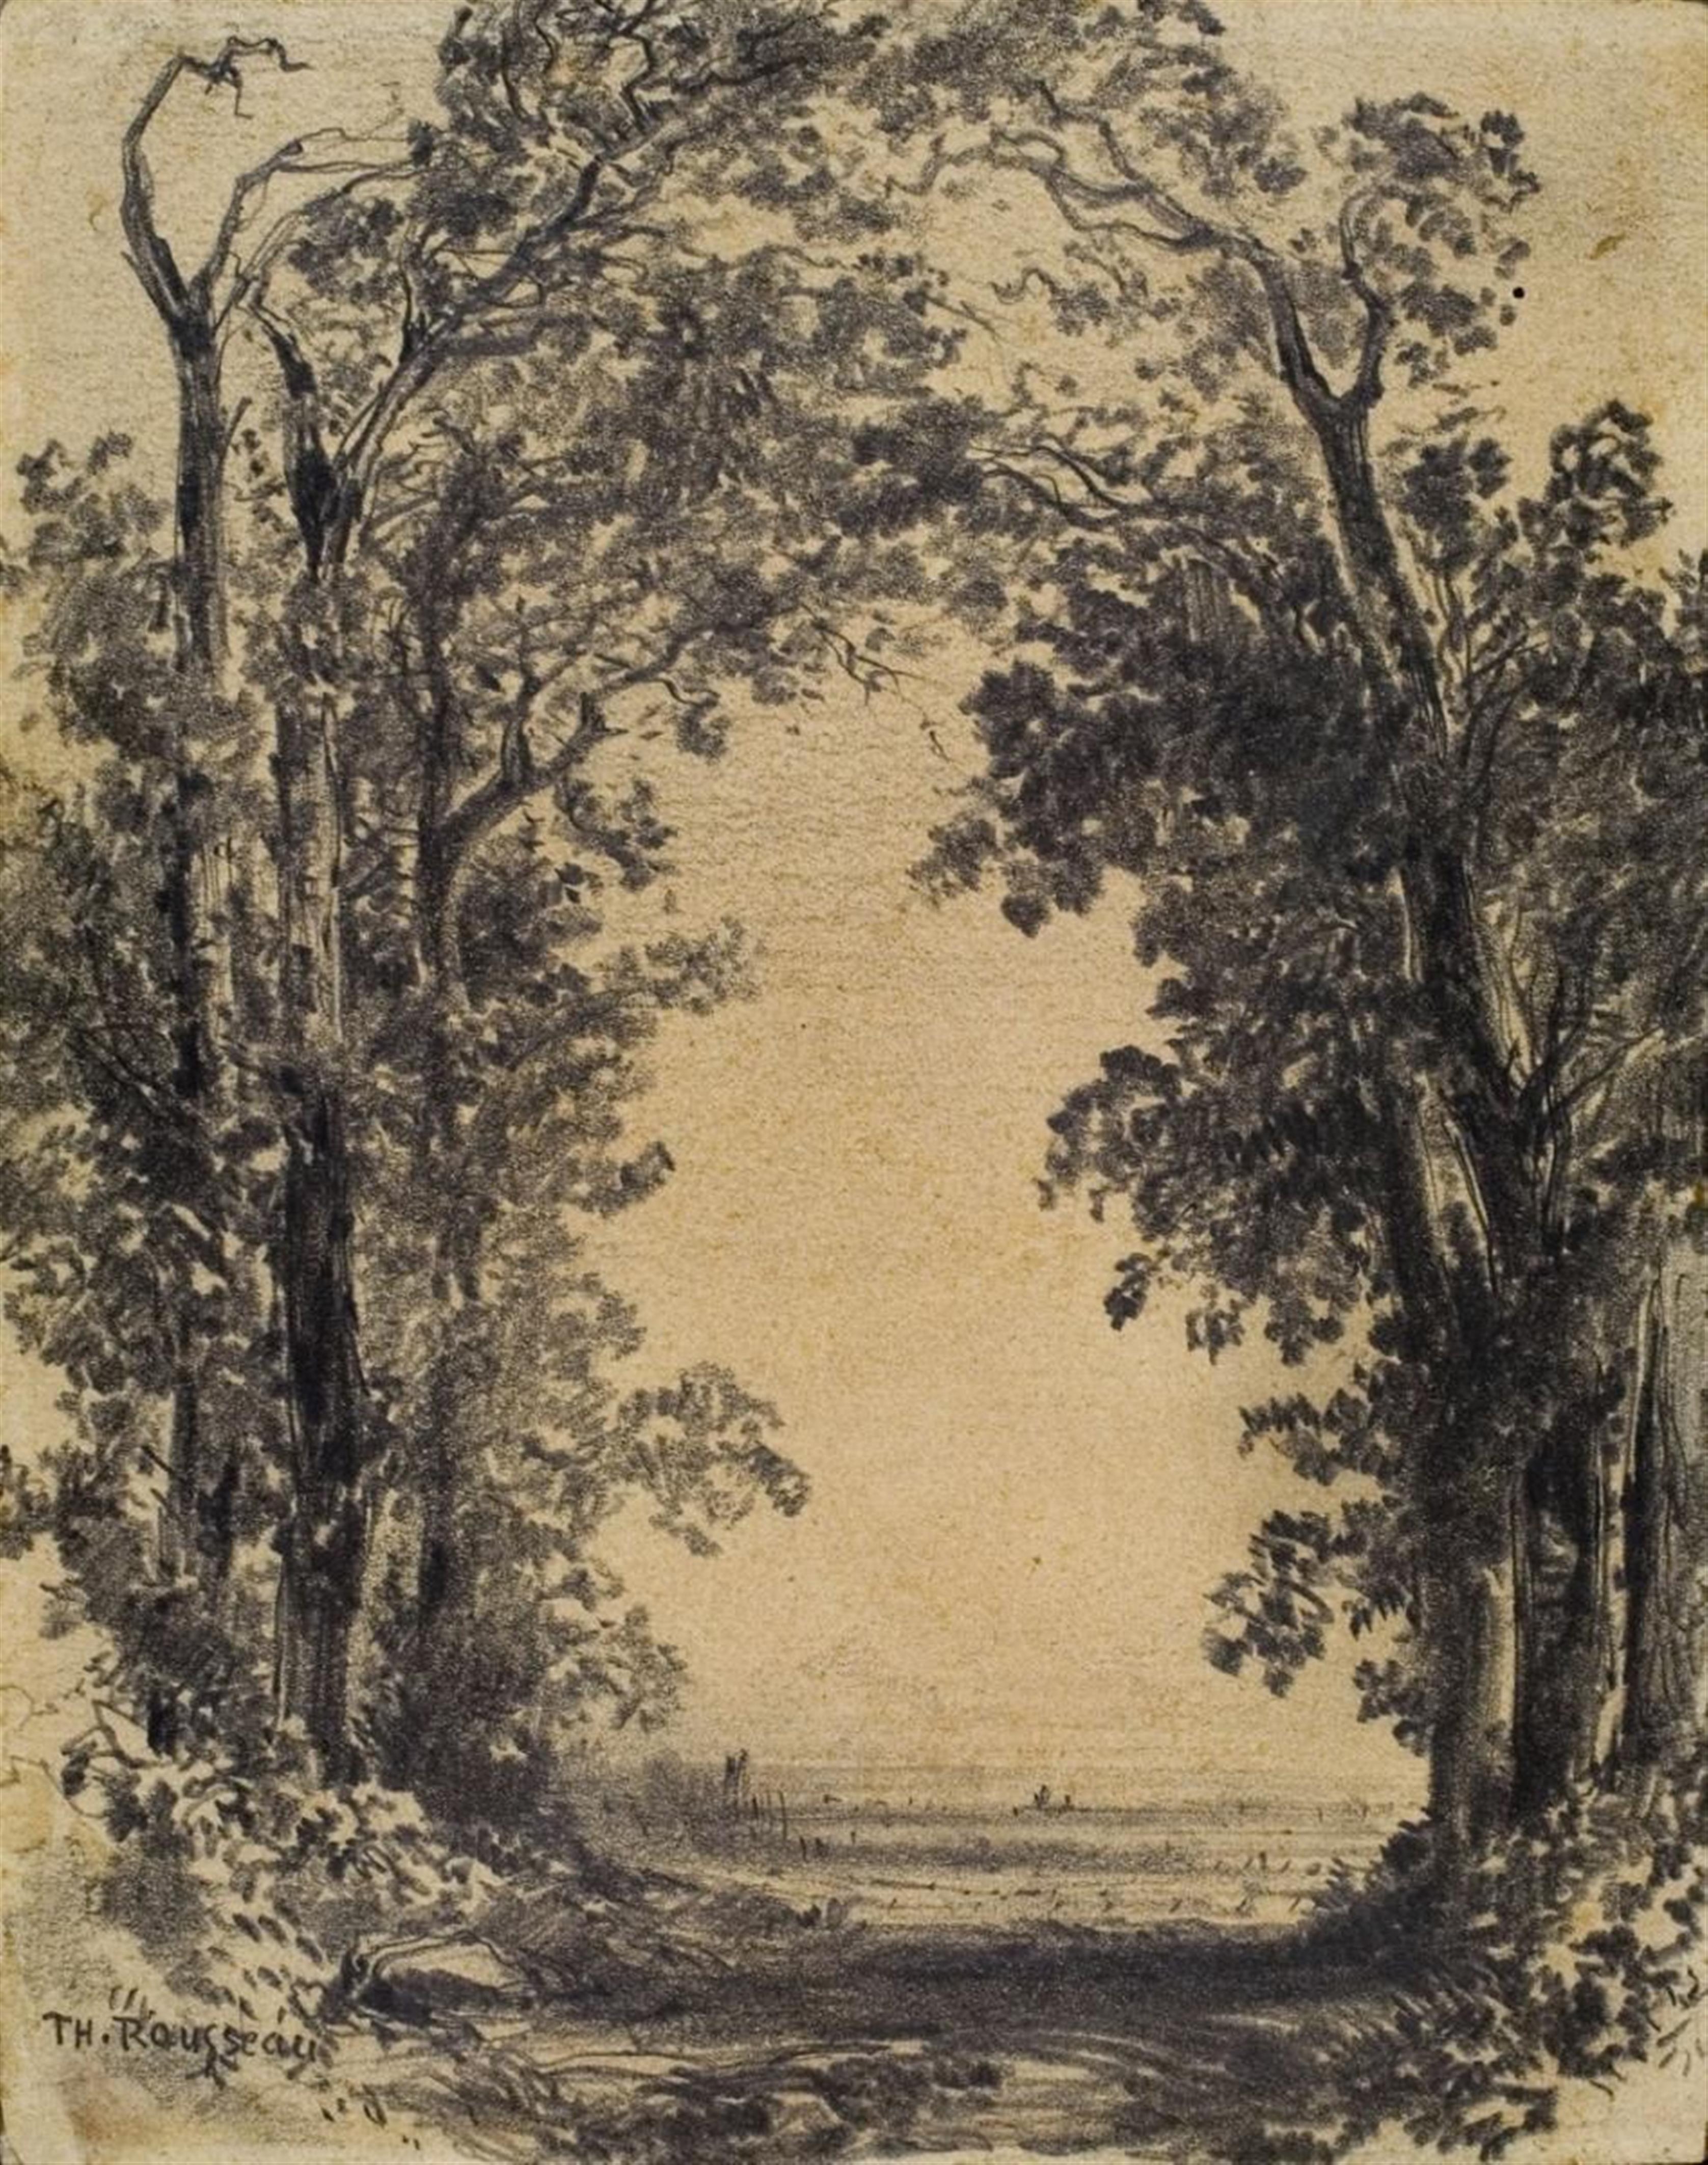 Théodore Rousseau - VIEW OF A PARK - image-1